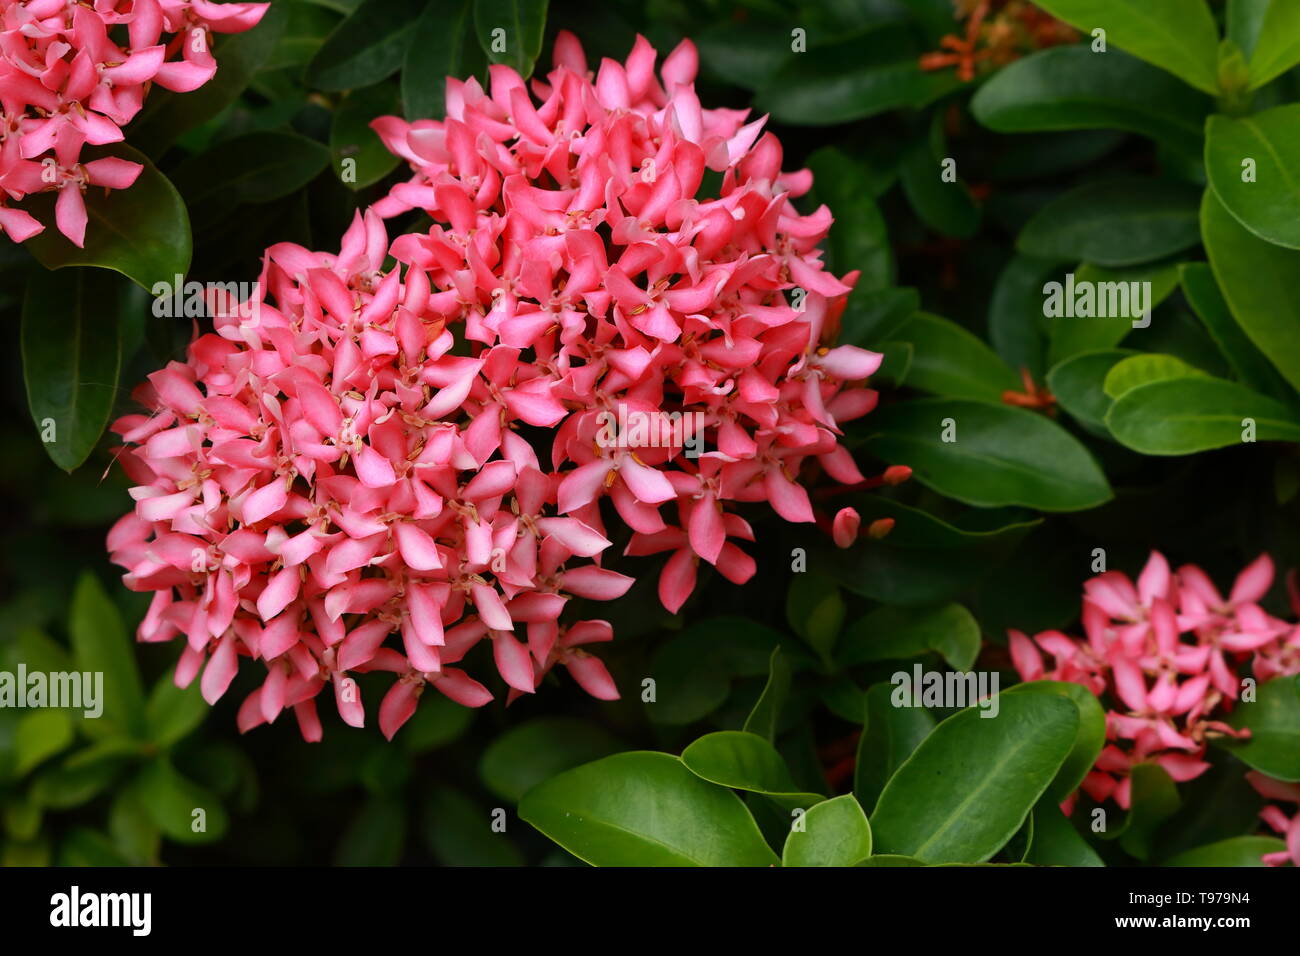 Closeup of beautiful shape of pink ixora or spike flowers blooming in garden Stock Photo